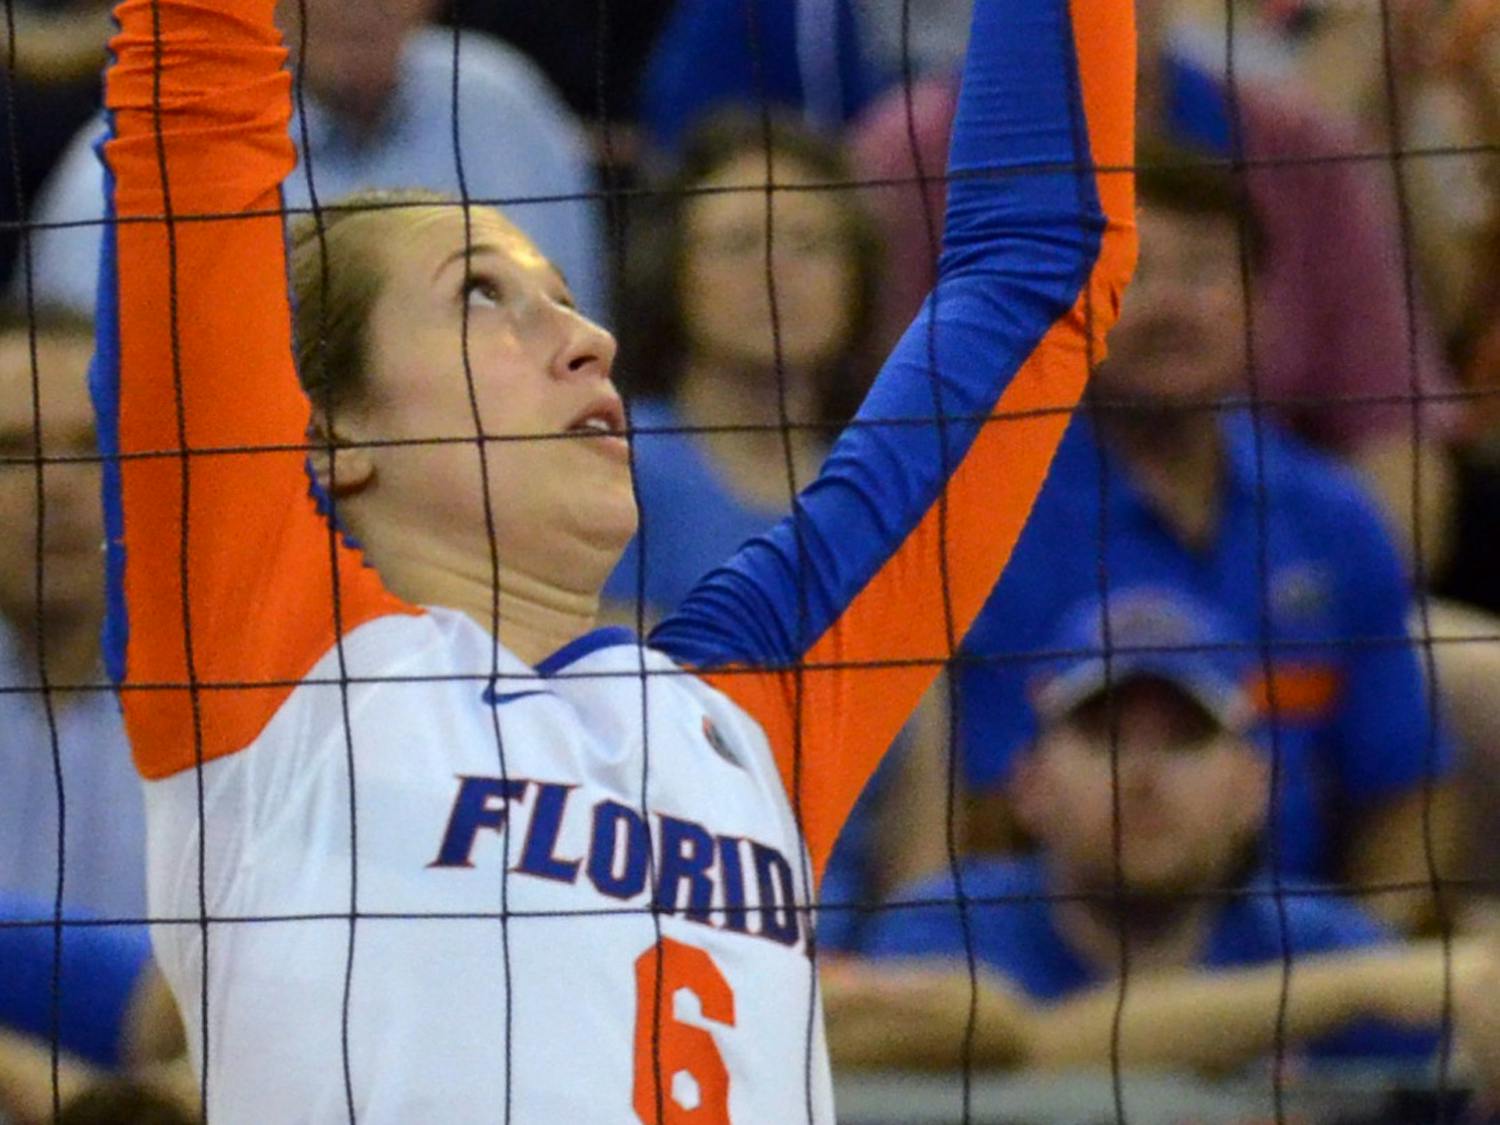 Mackenzie Dagostino sets the ball during No. 8 seed Florida's 3-1 win against Miami in the second round of the NCAA Tournament on Dec. 6, 2014, in the O'Connell Center.